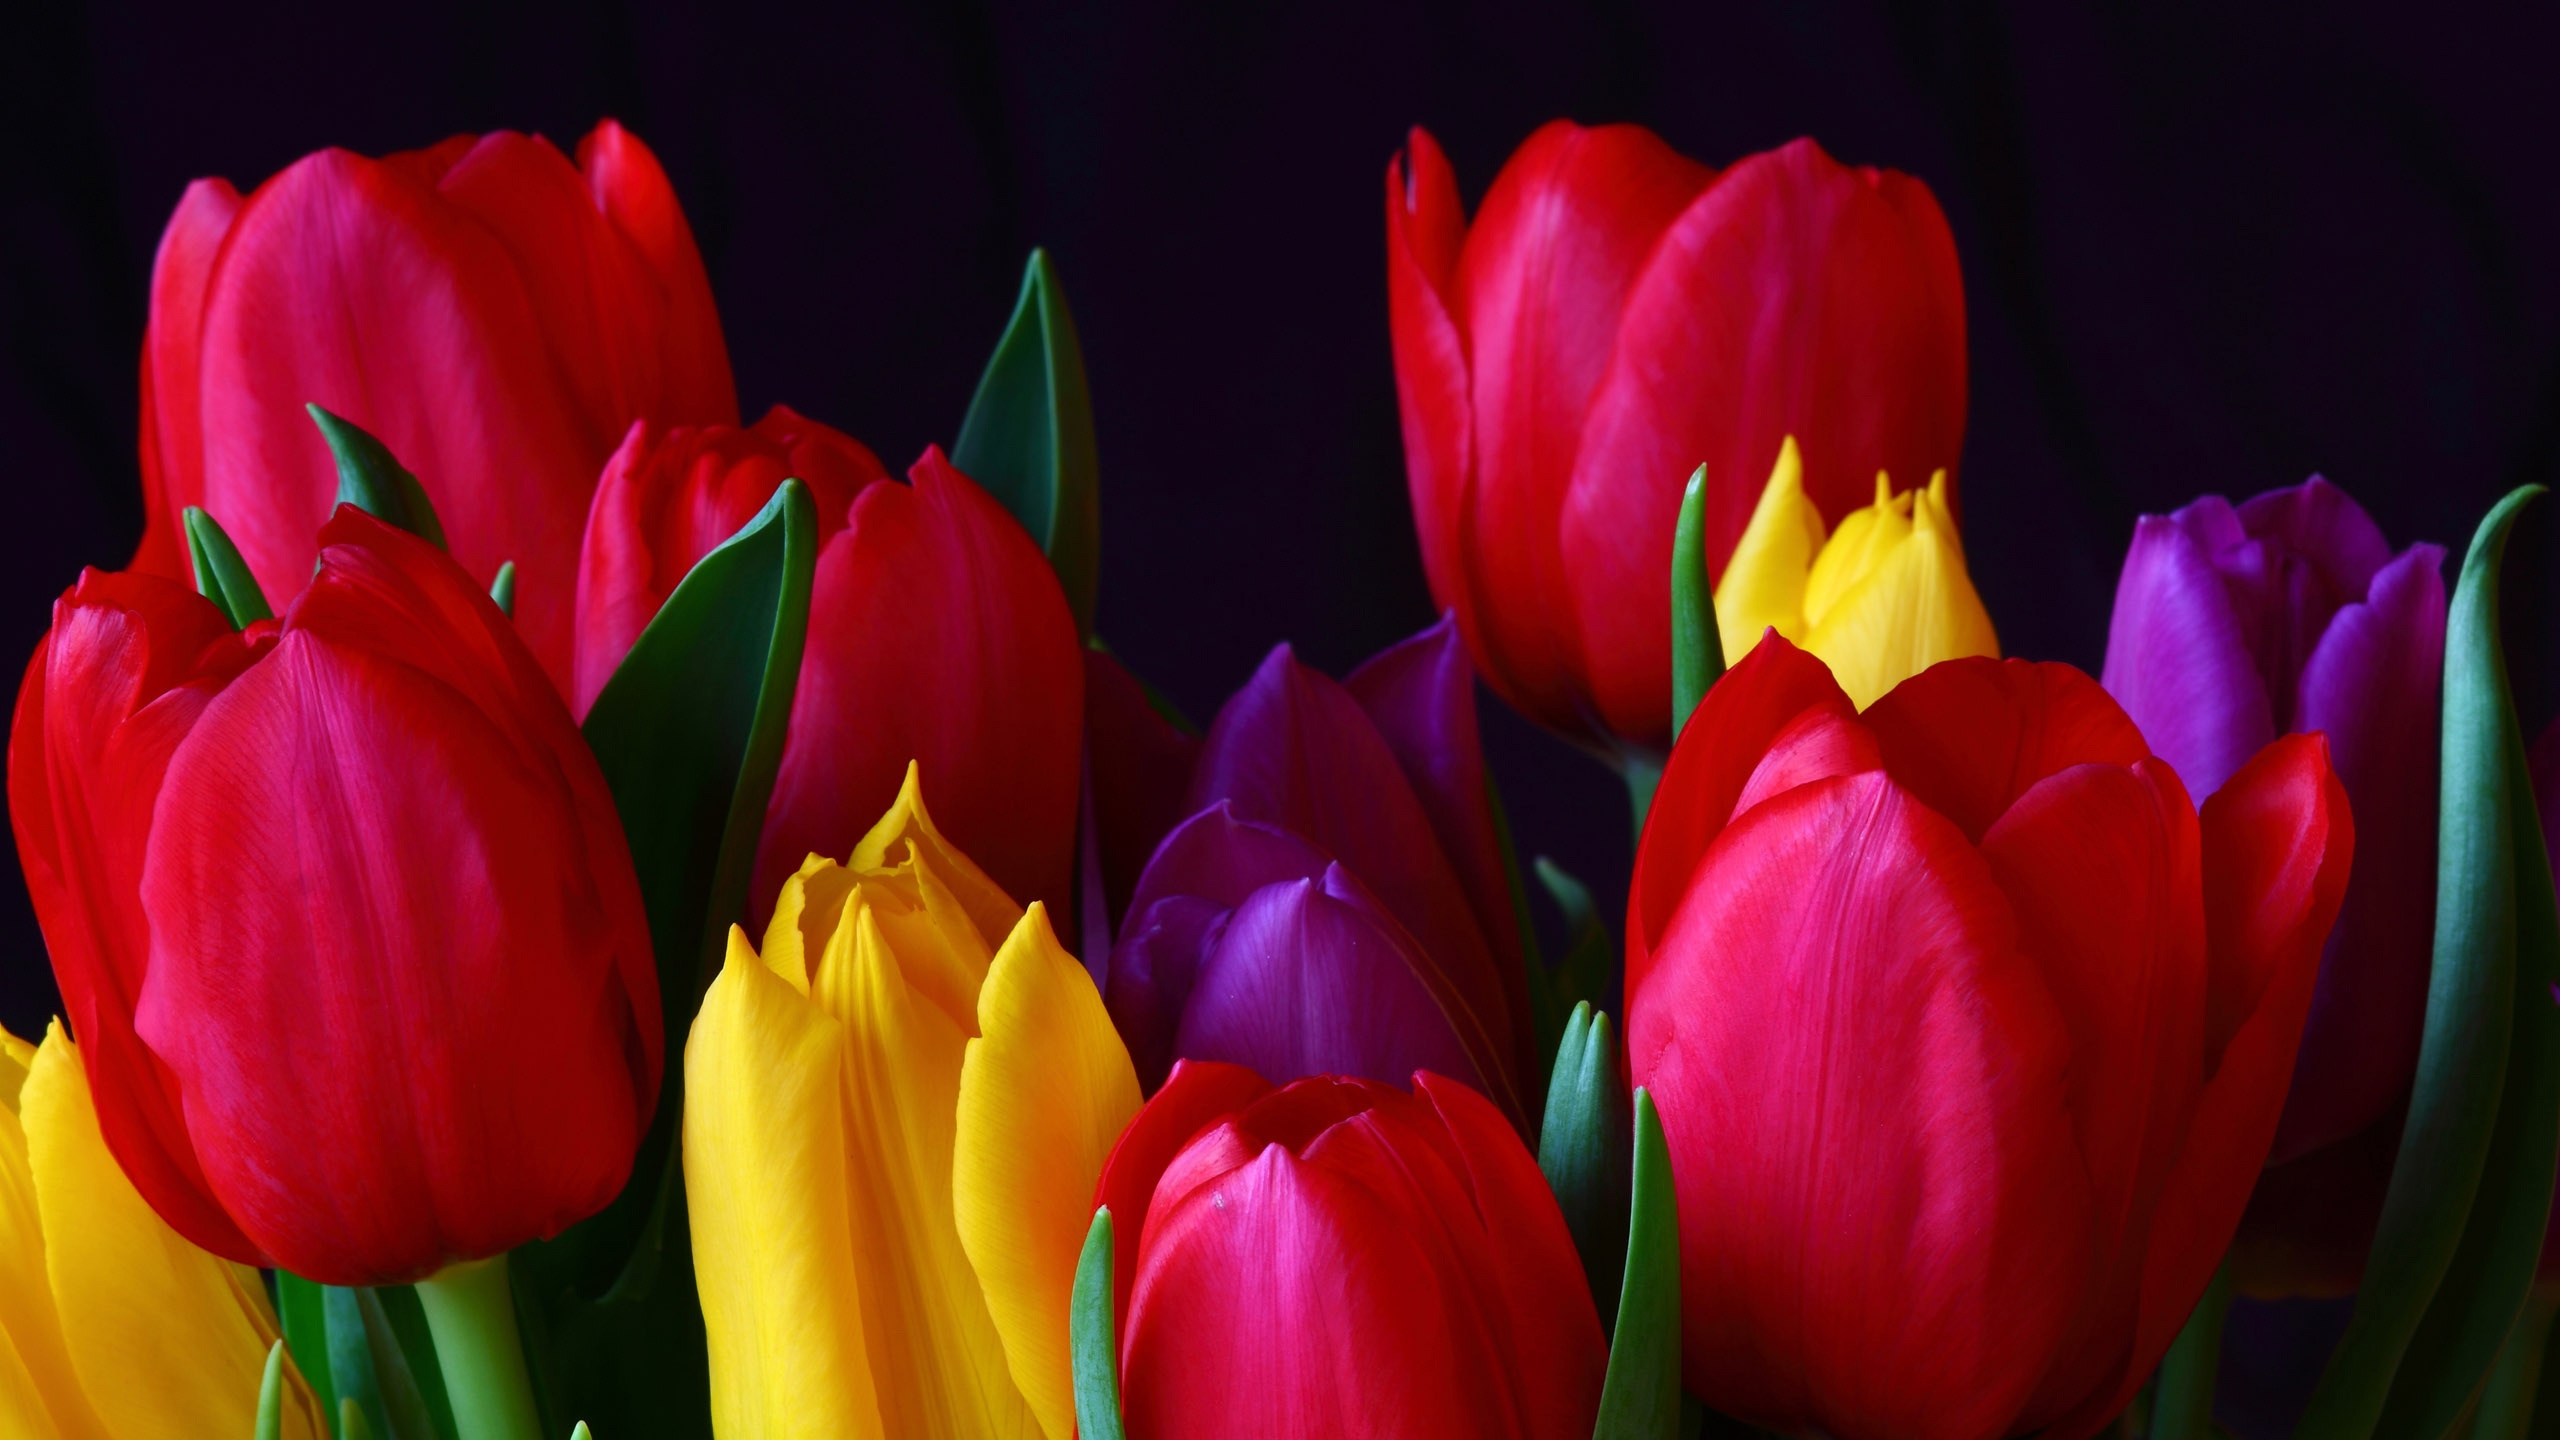 Colourful Tulips for 2560x1440 HDTV resolution